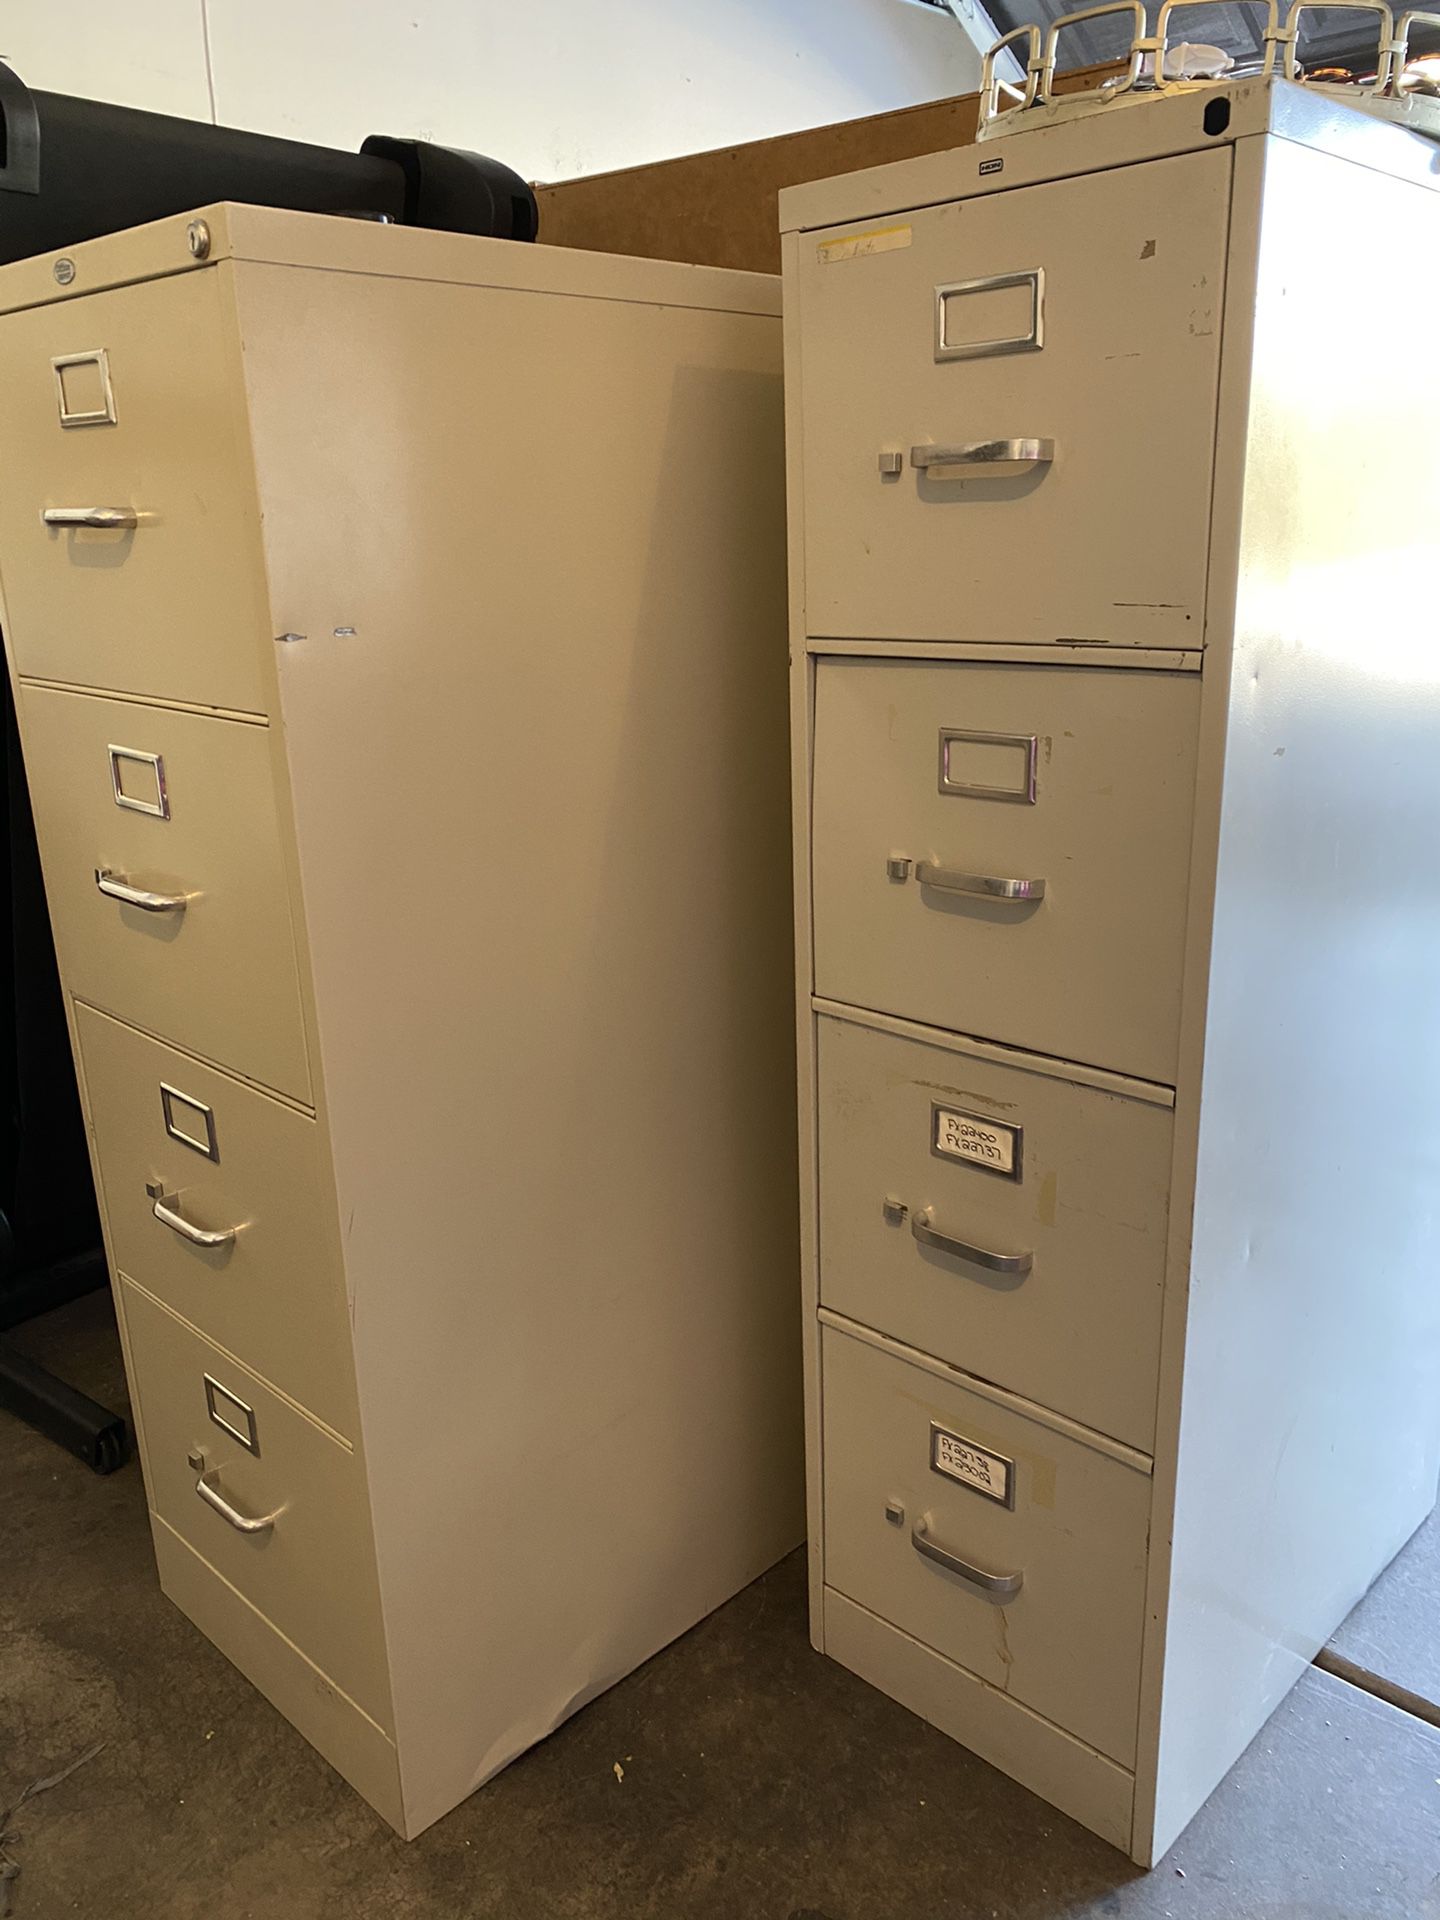 PENDING:2 four drawer file cabinets